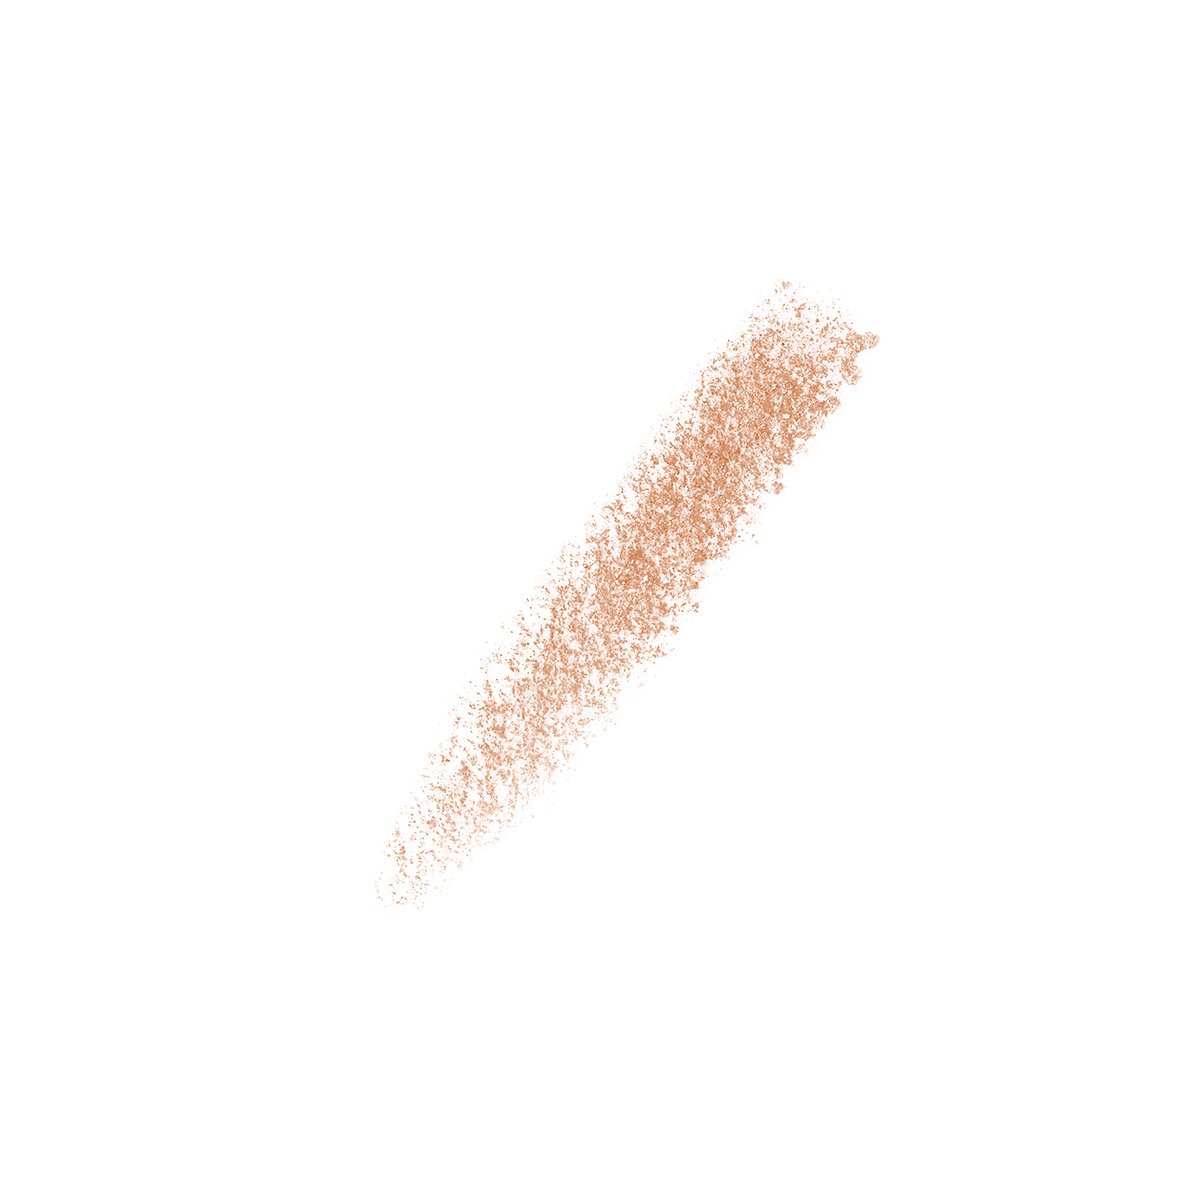 MOUSSEUX - Chamois with Champagne Sparkle - swatch of shimmering apricot eye highlighter